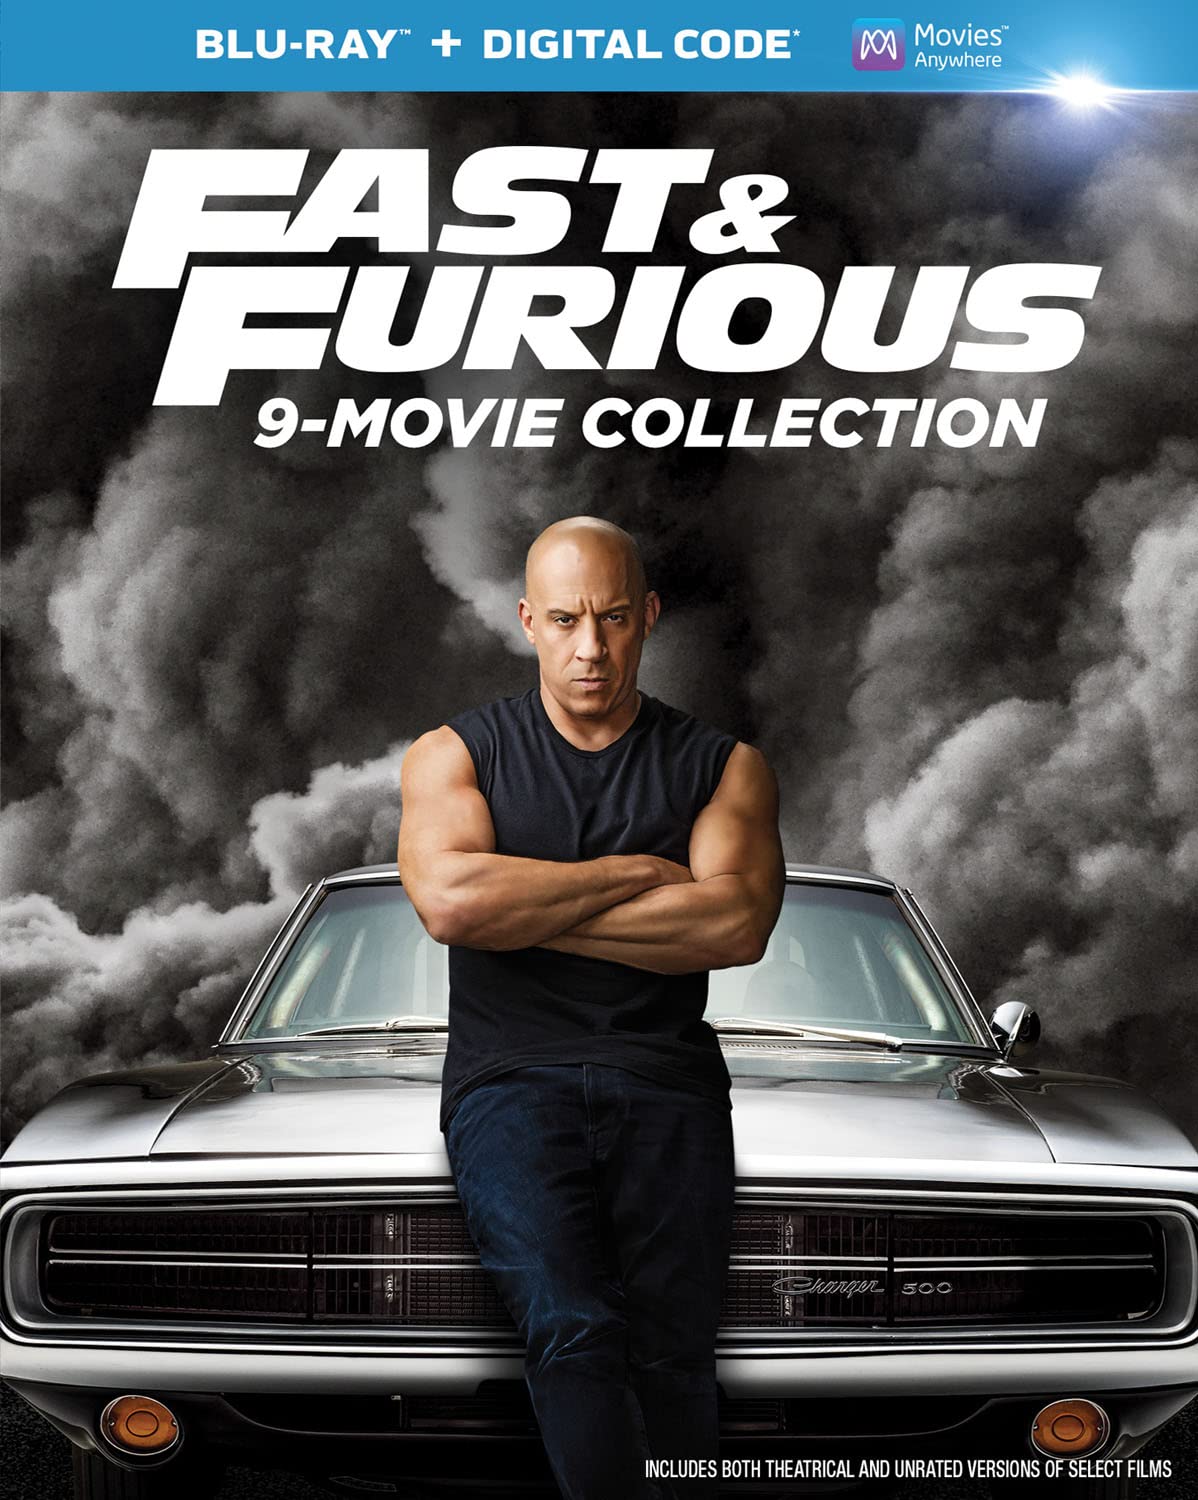 Fast & Furious 9-Movie Collection (Blu-ray + Digital) $30 + Free Shipping